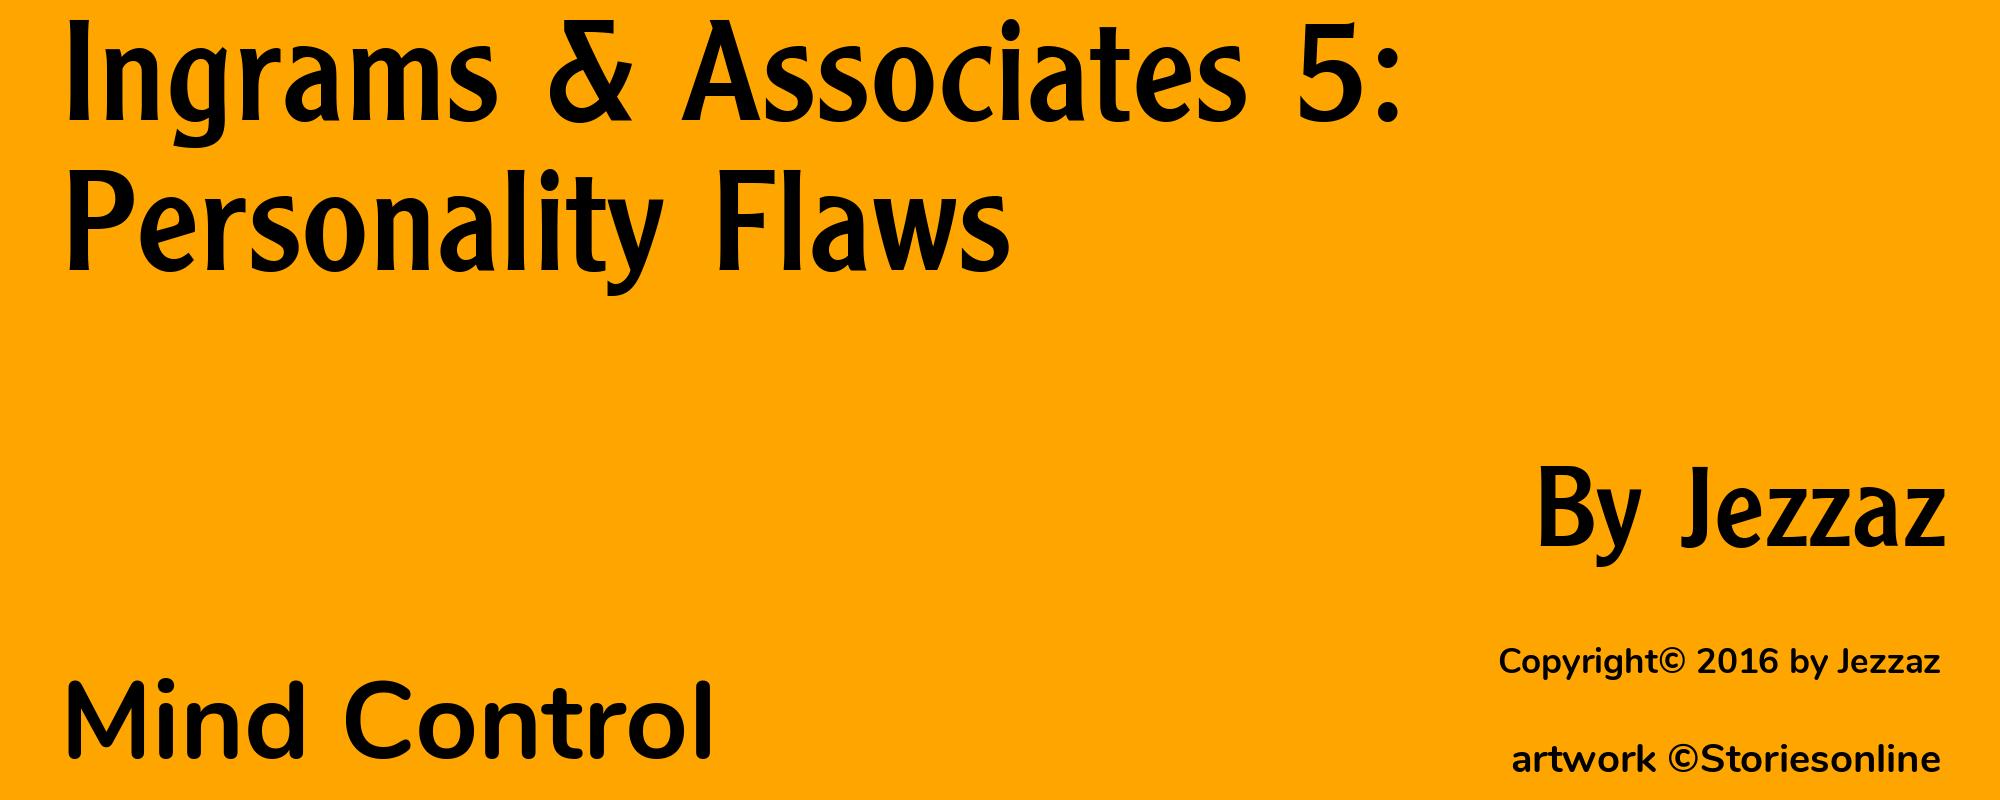 Ingrams & Associates 5: Personality Flaws - Cover